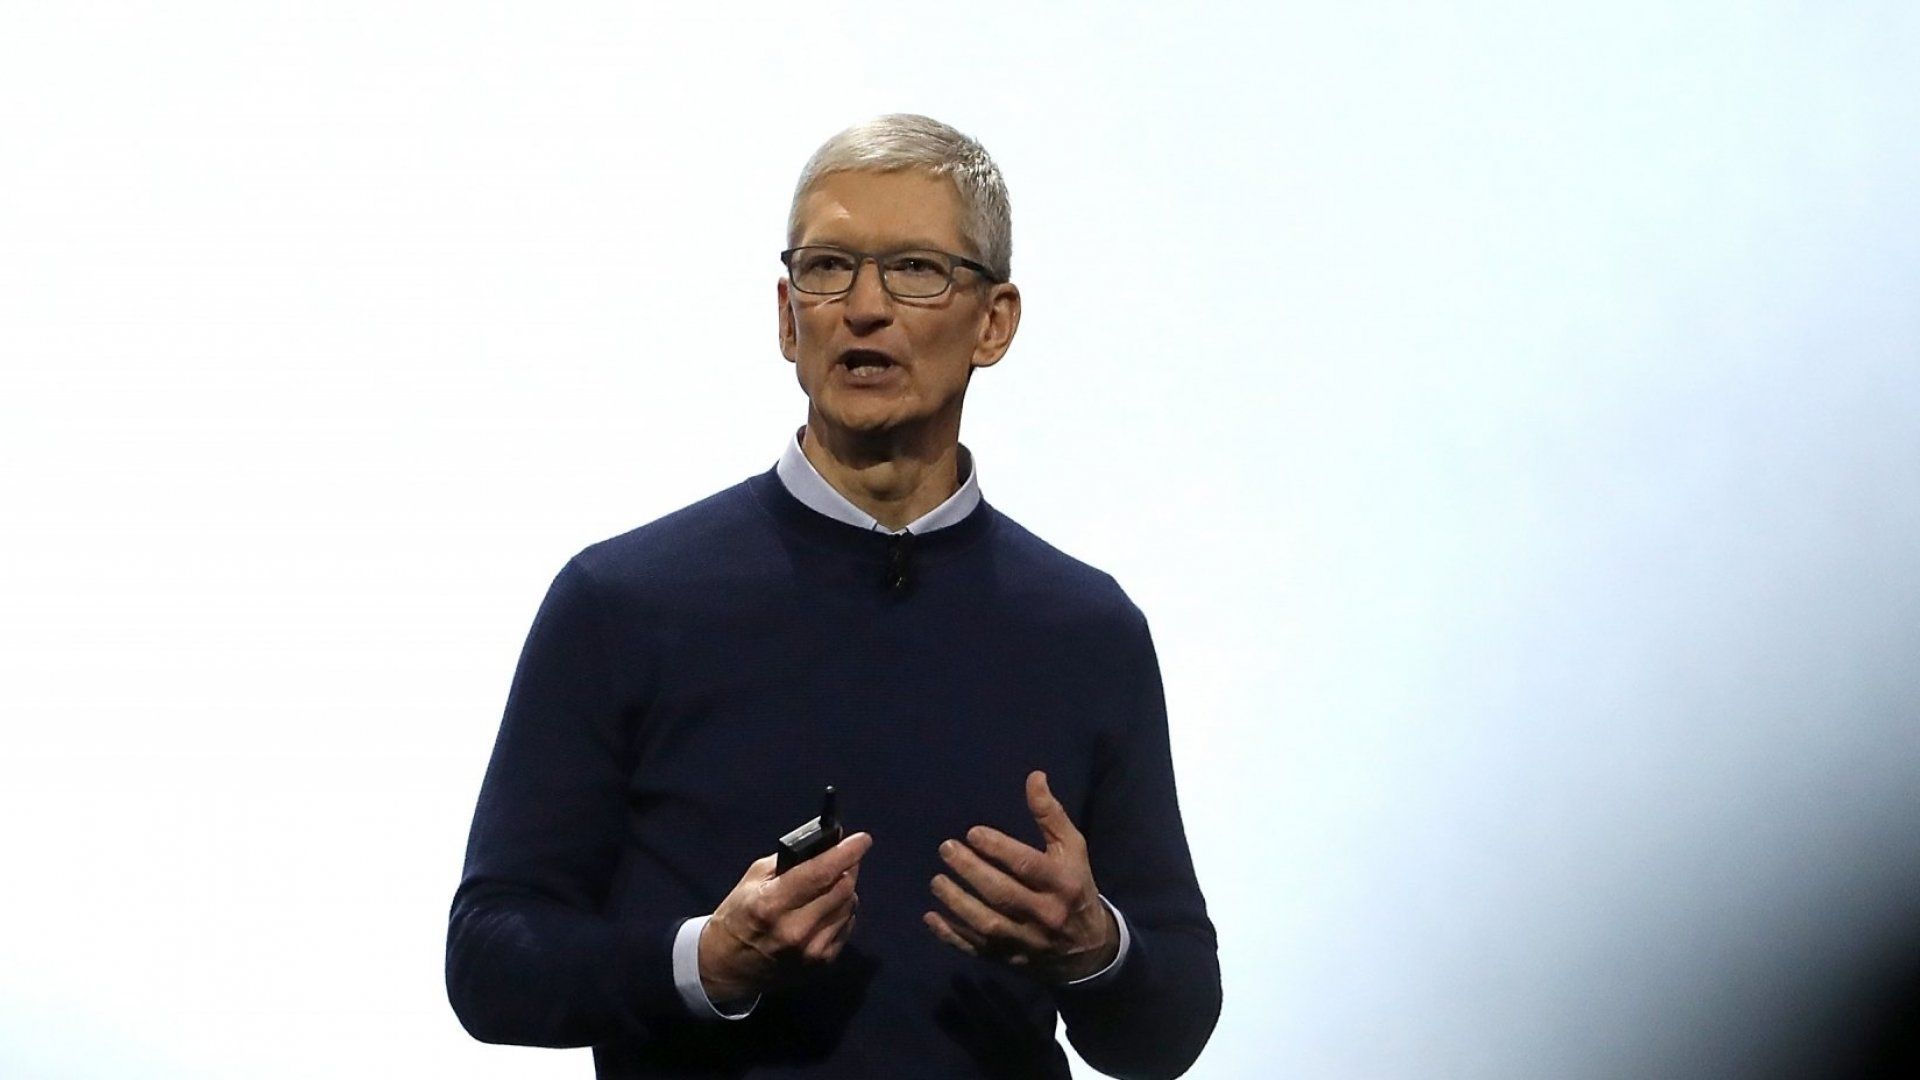 This Is What Tim Cook Said About Going to Work at Apple